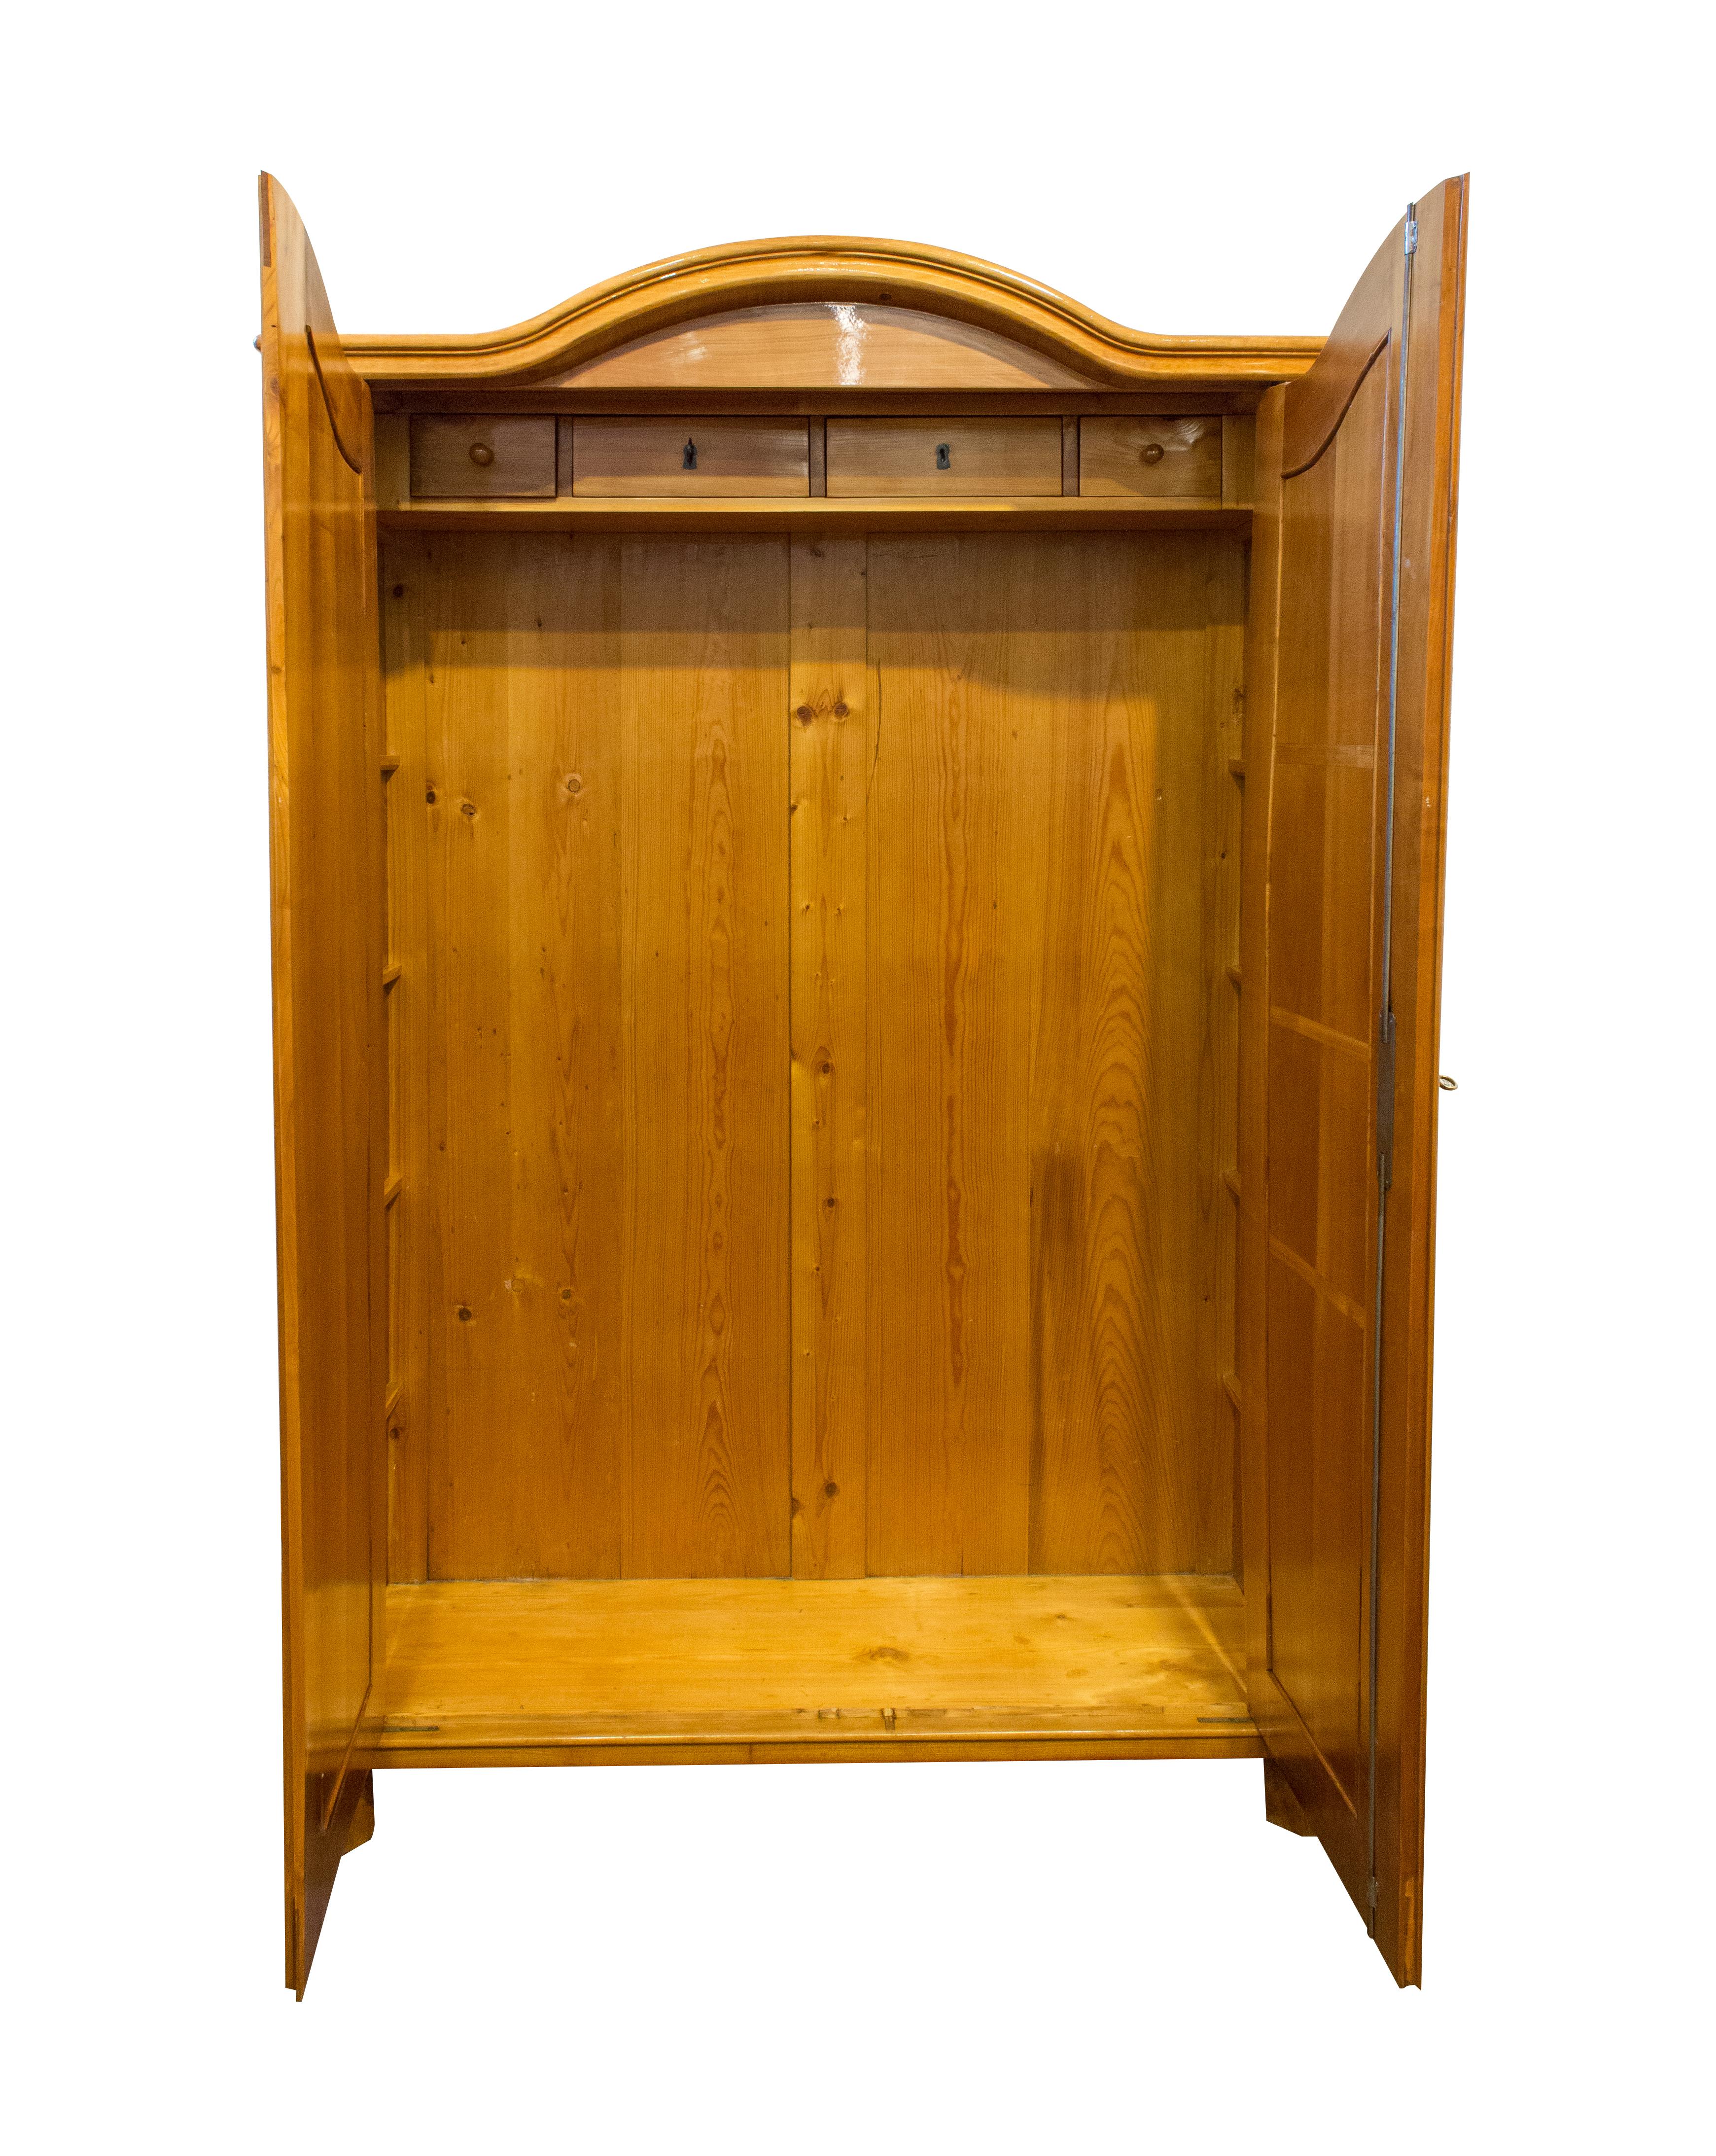 Wonderfully solid cherrywood cabinet or wardrobe. The cabinet dates from the time of the late Biedermeier period called viennese baroque. In a very well restored condition. An interior division will be made according to your wishes. The cabinet is